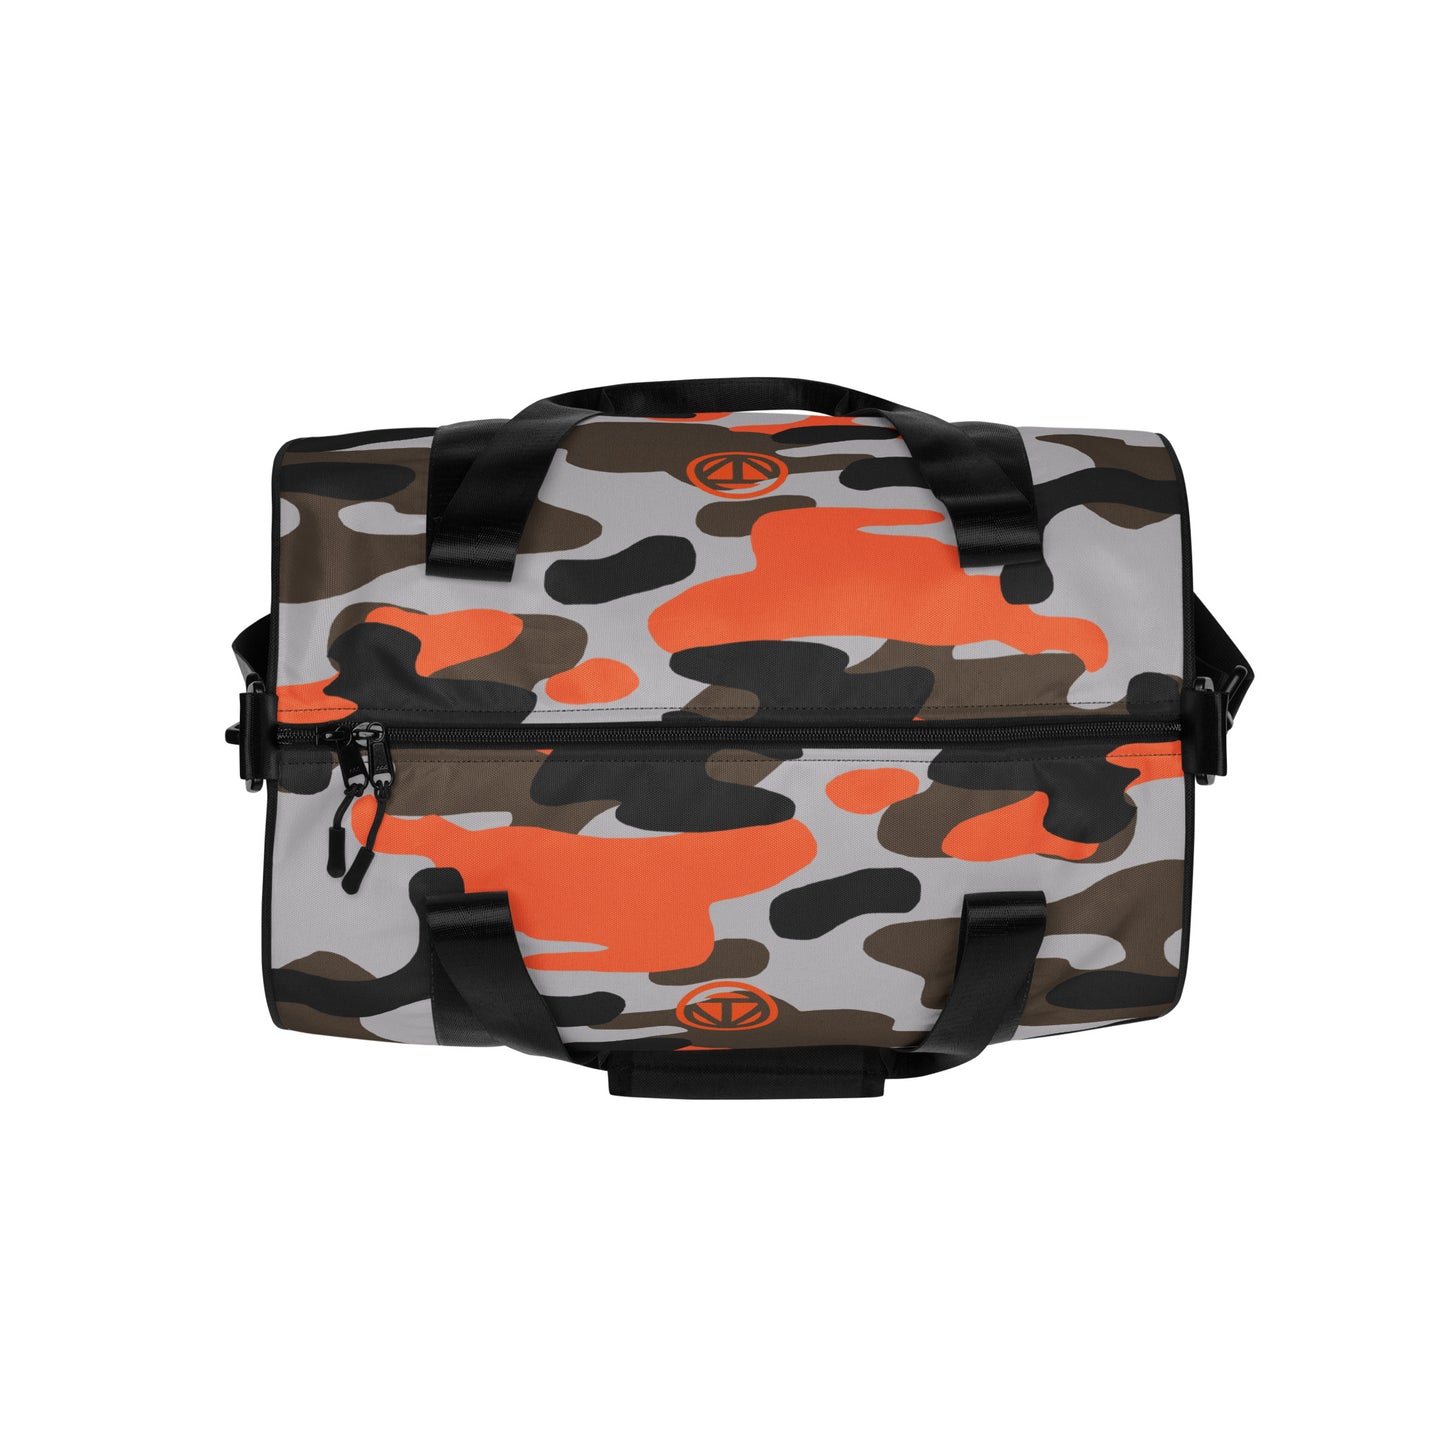 TIME OF VIBES - Sports Bag CAMO - €85.00